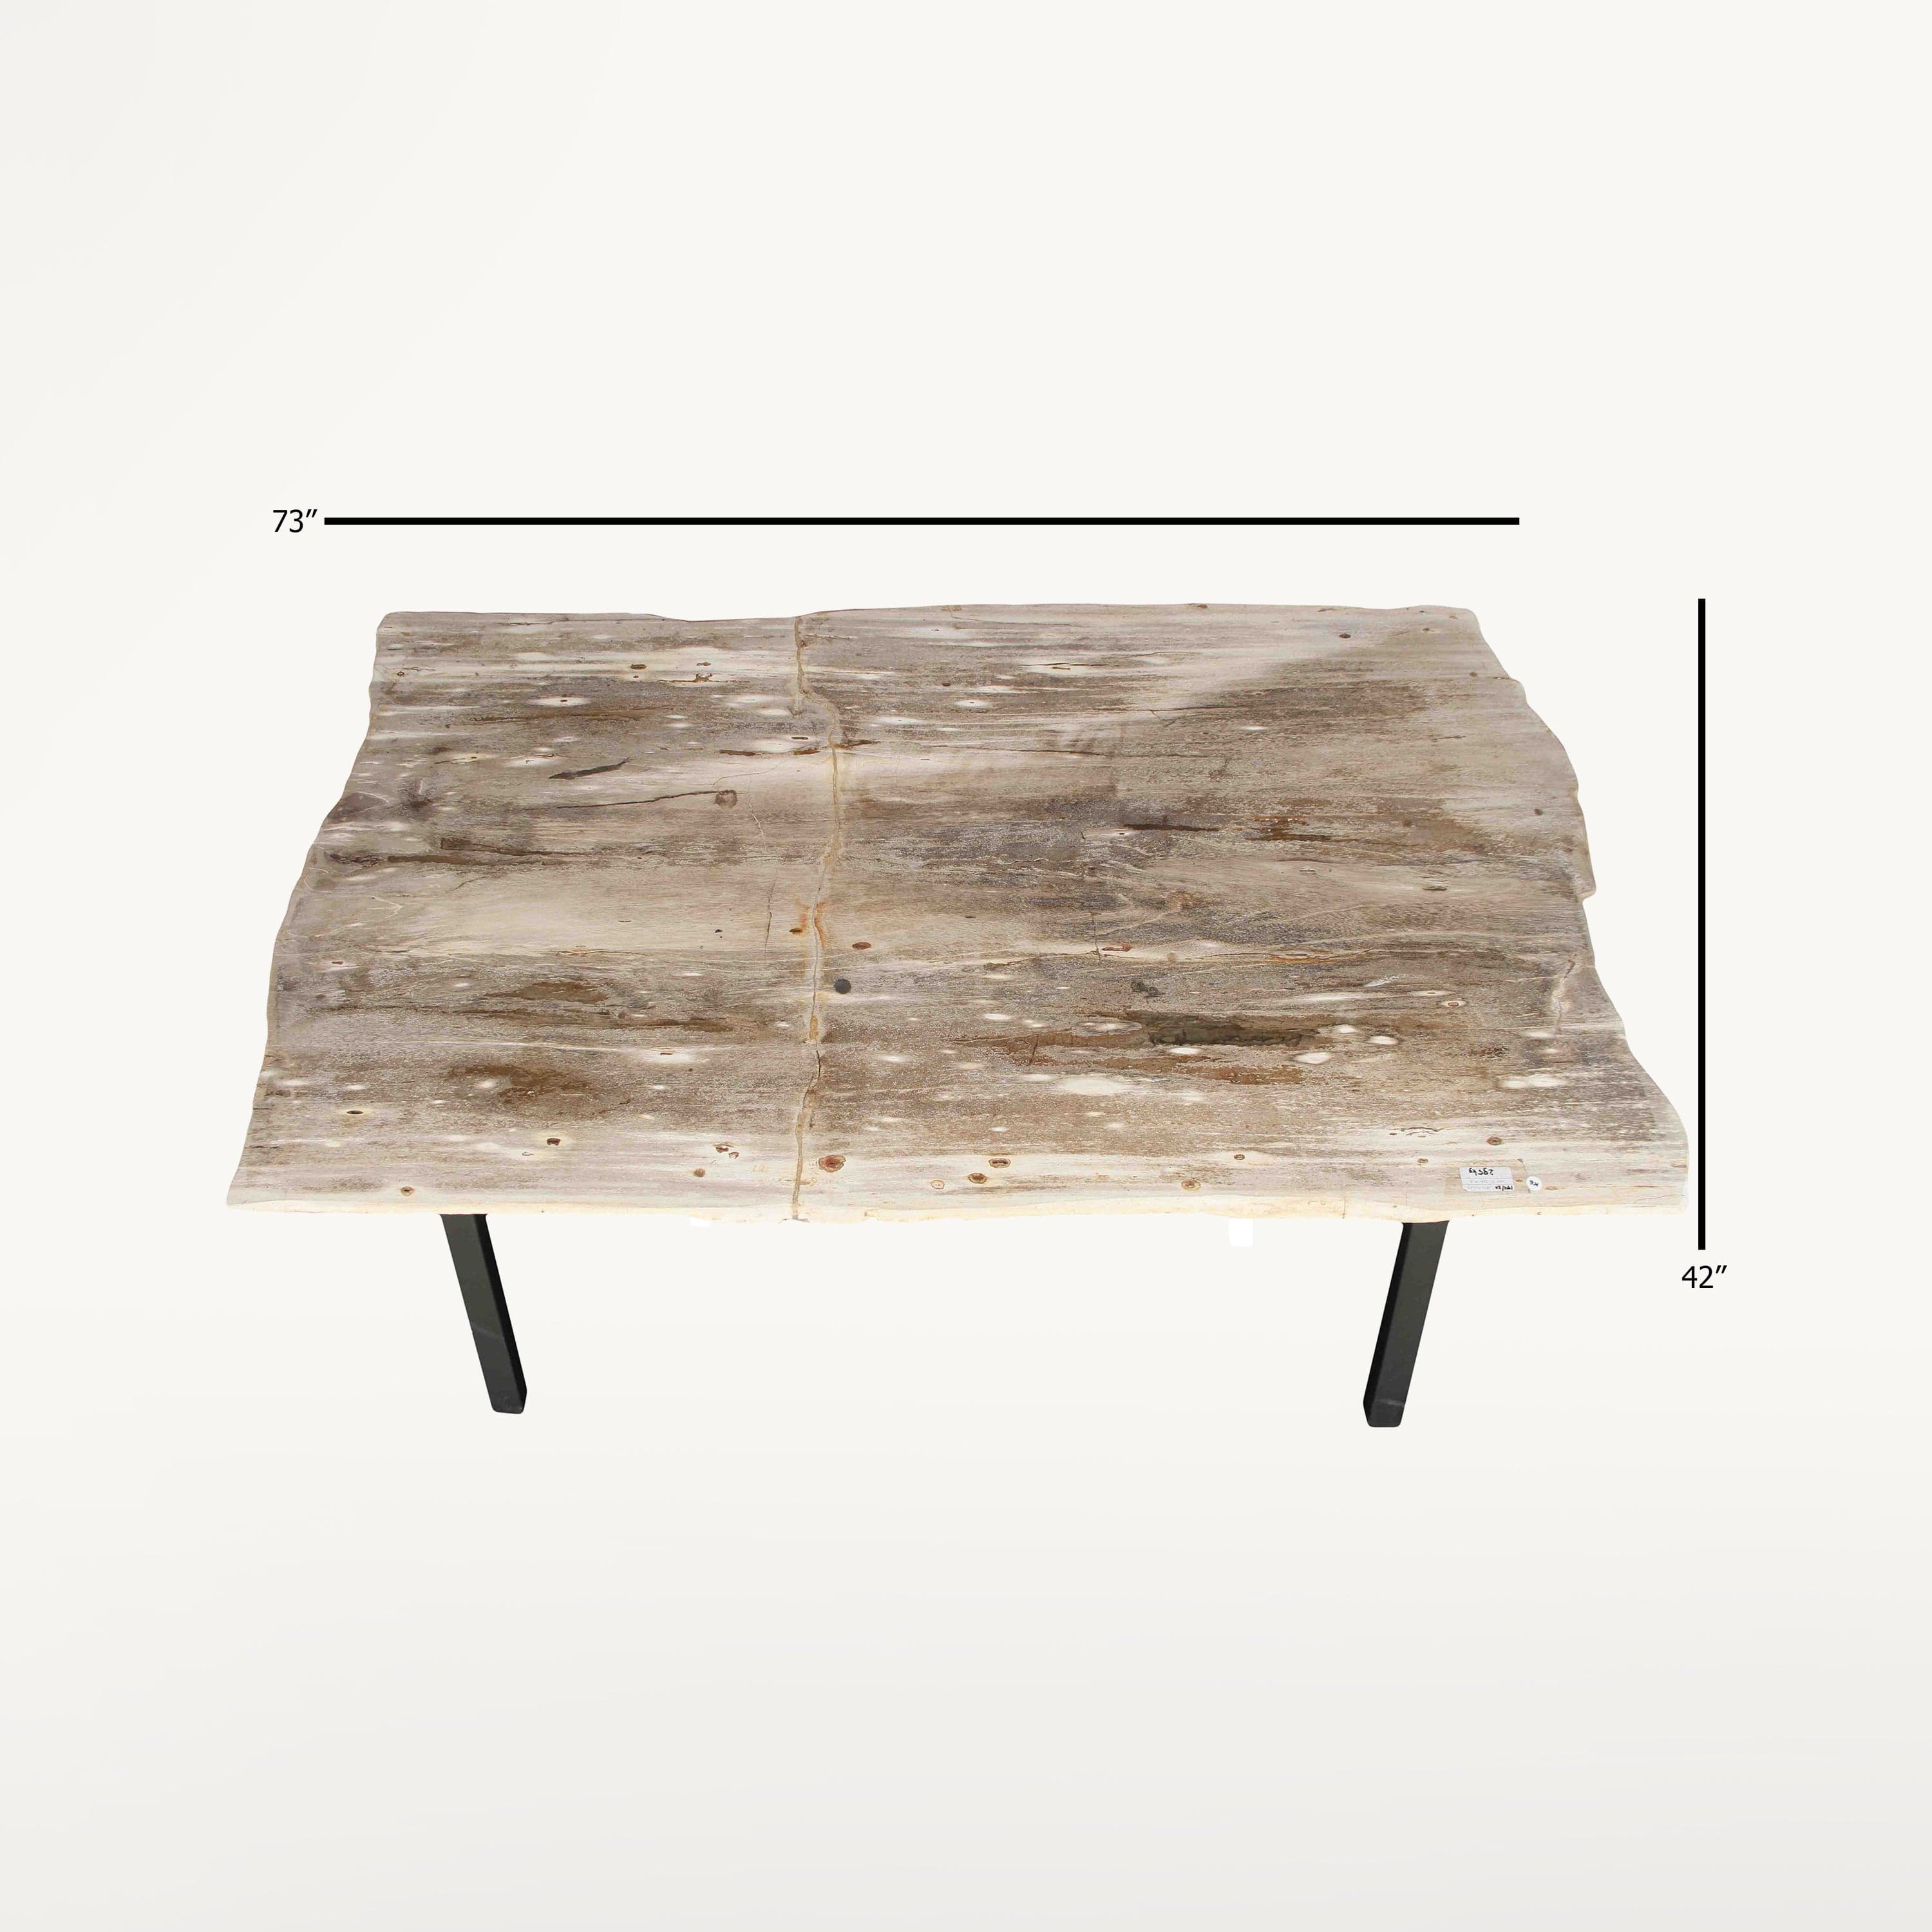 Kalifano Petrified Wood Natural Polished Petrified Wood Rectangular Table Top from Indonesia - 73" / 650 lbs PWR23600.001